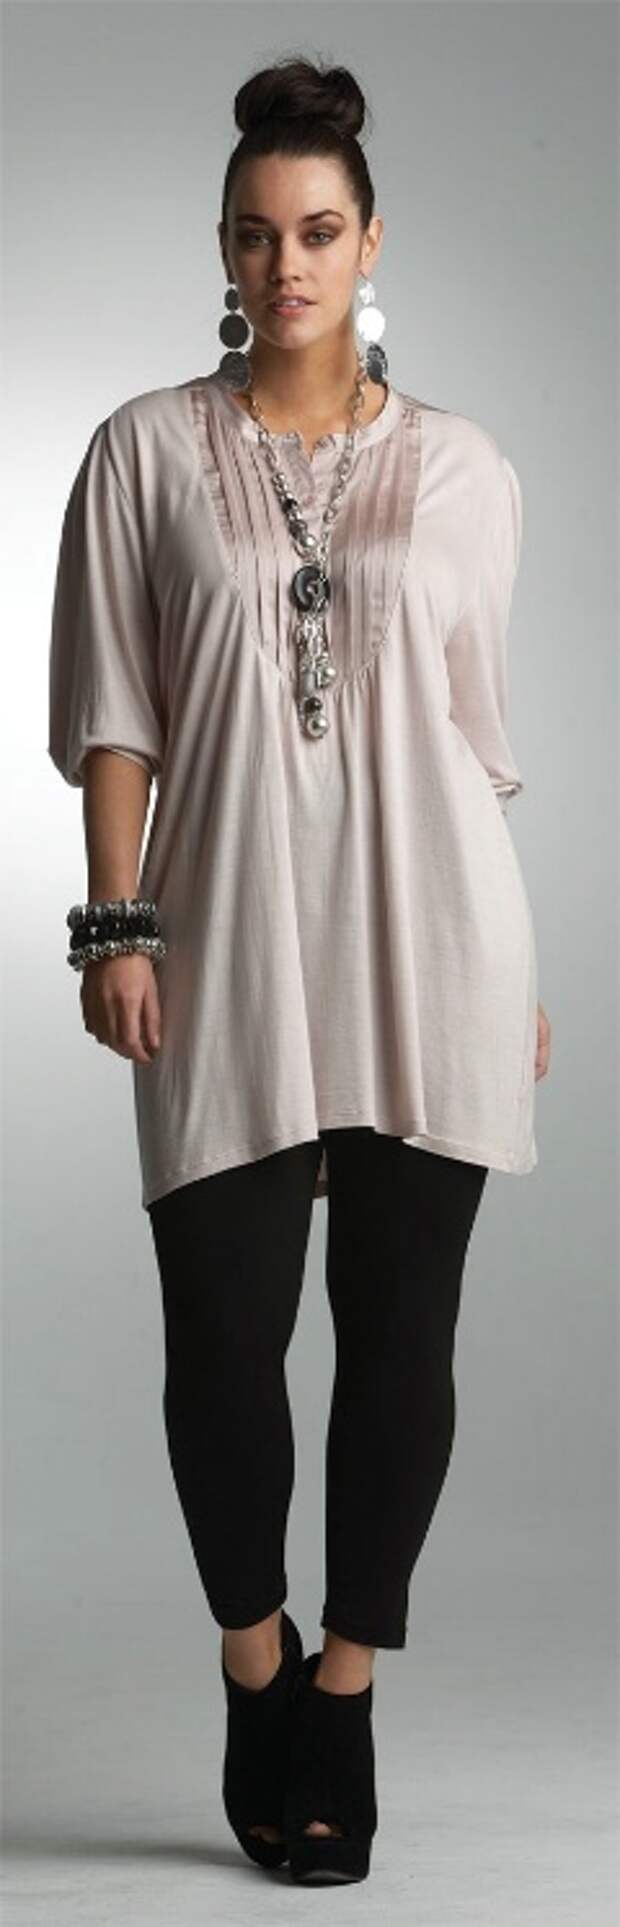 PRETTY IN PINK TUNIC## - Tops - My Size, Plus Sized Women’s Fashion & Clothing